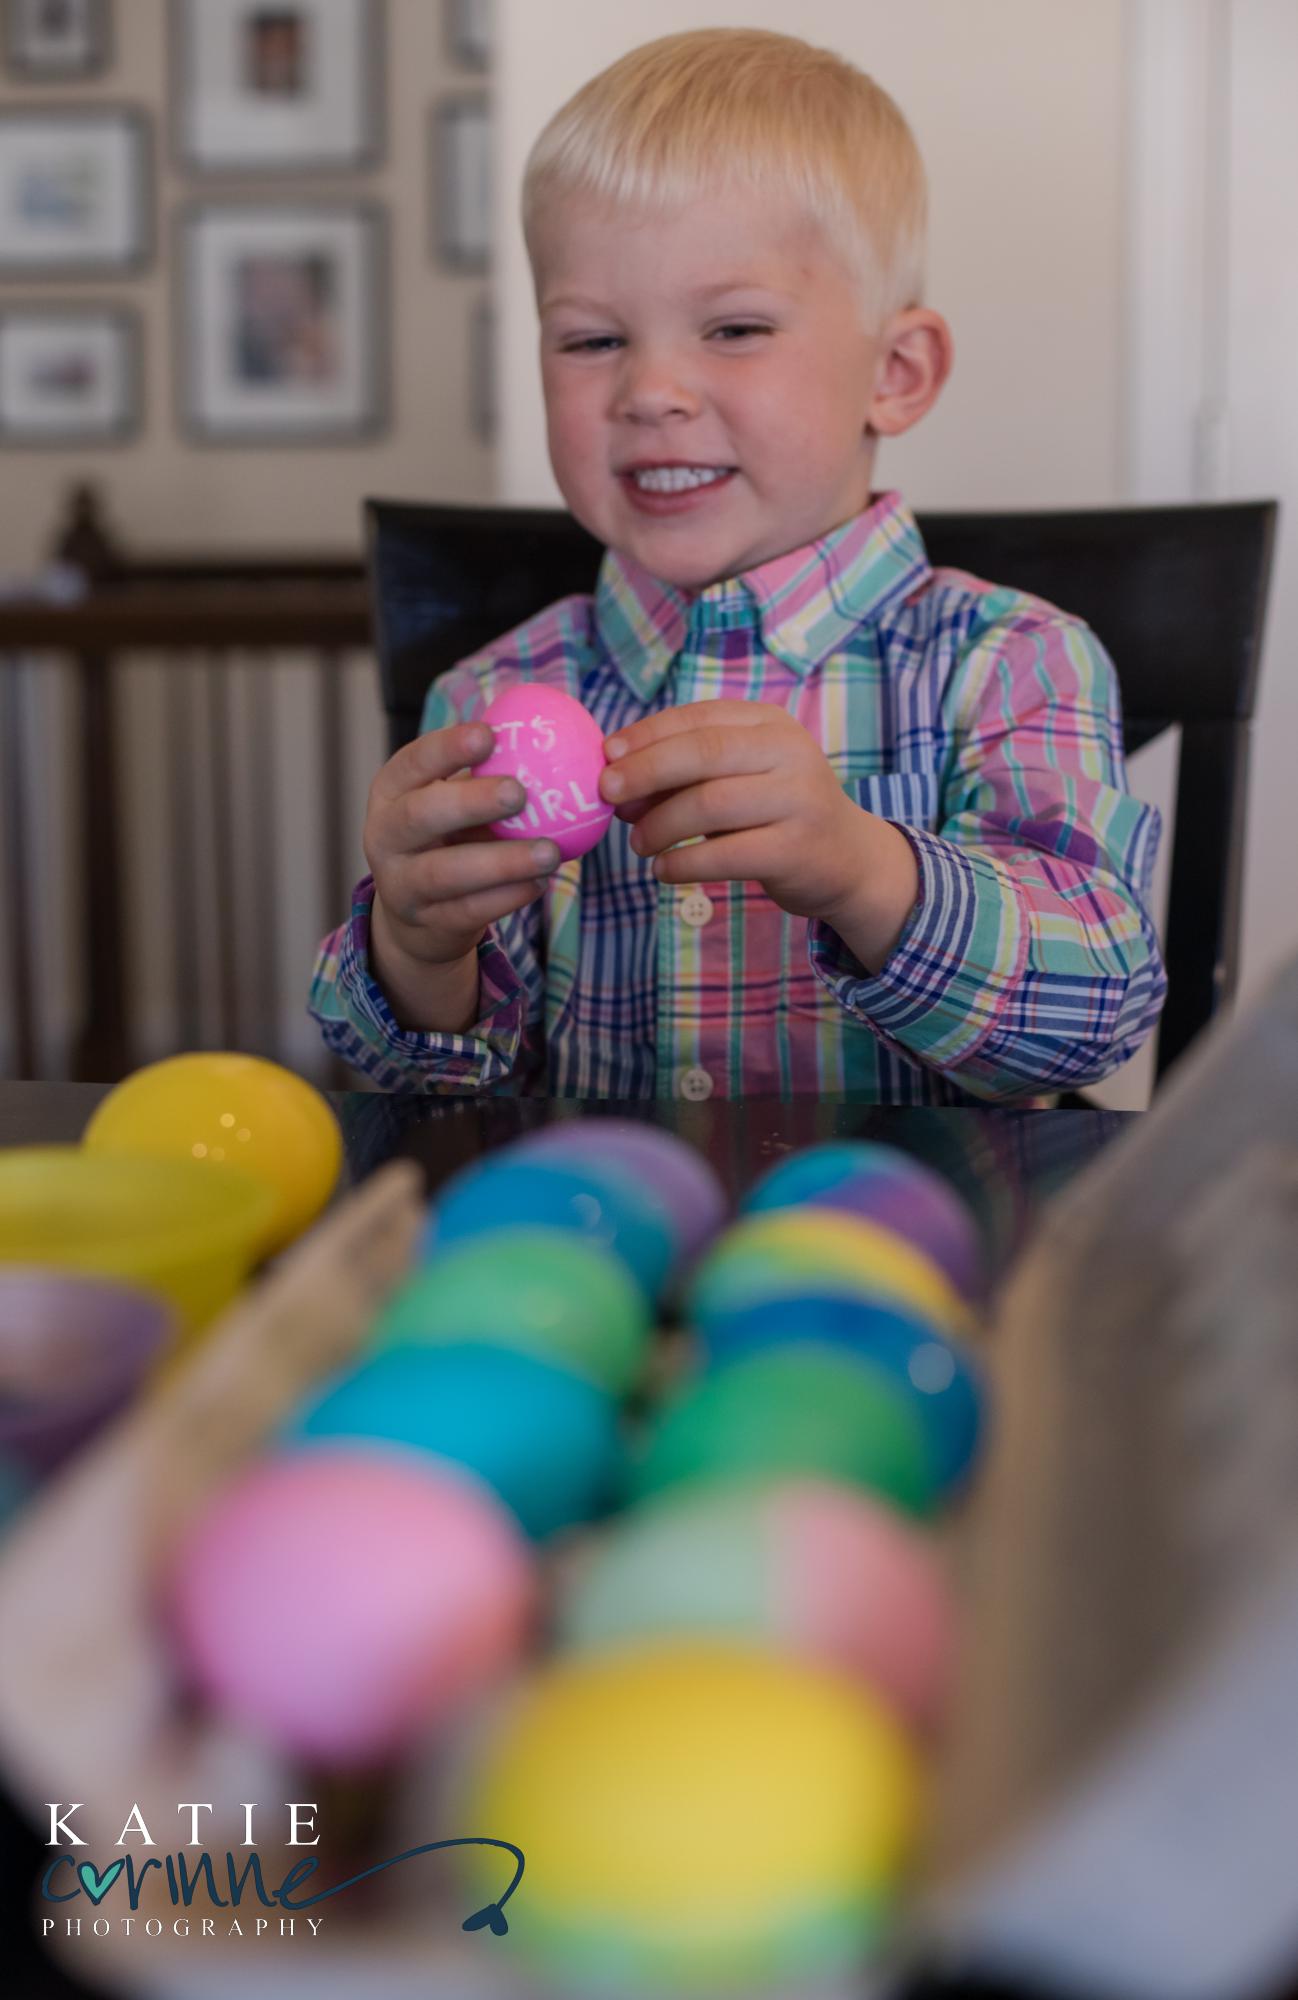 Colorado child sits behind colorful eggs on Easter Sunday